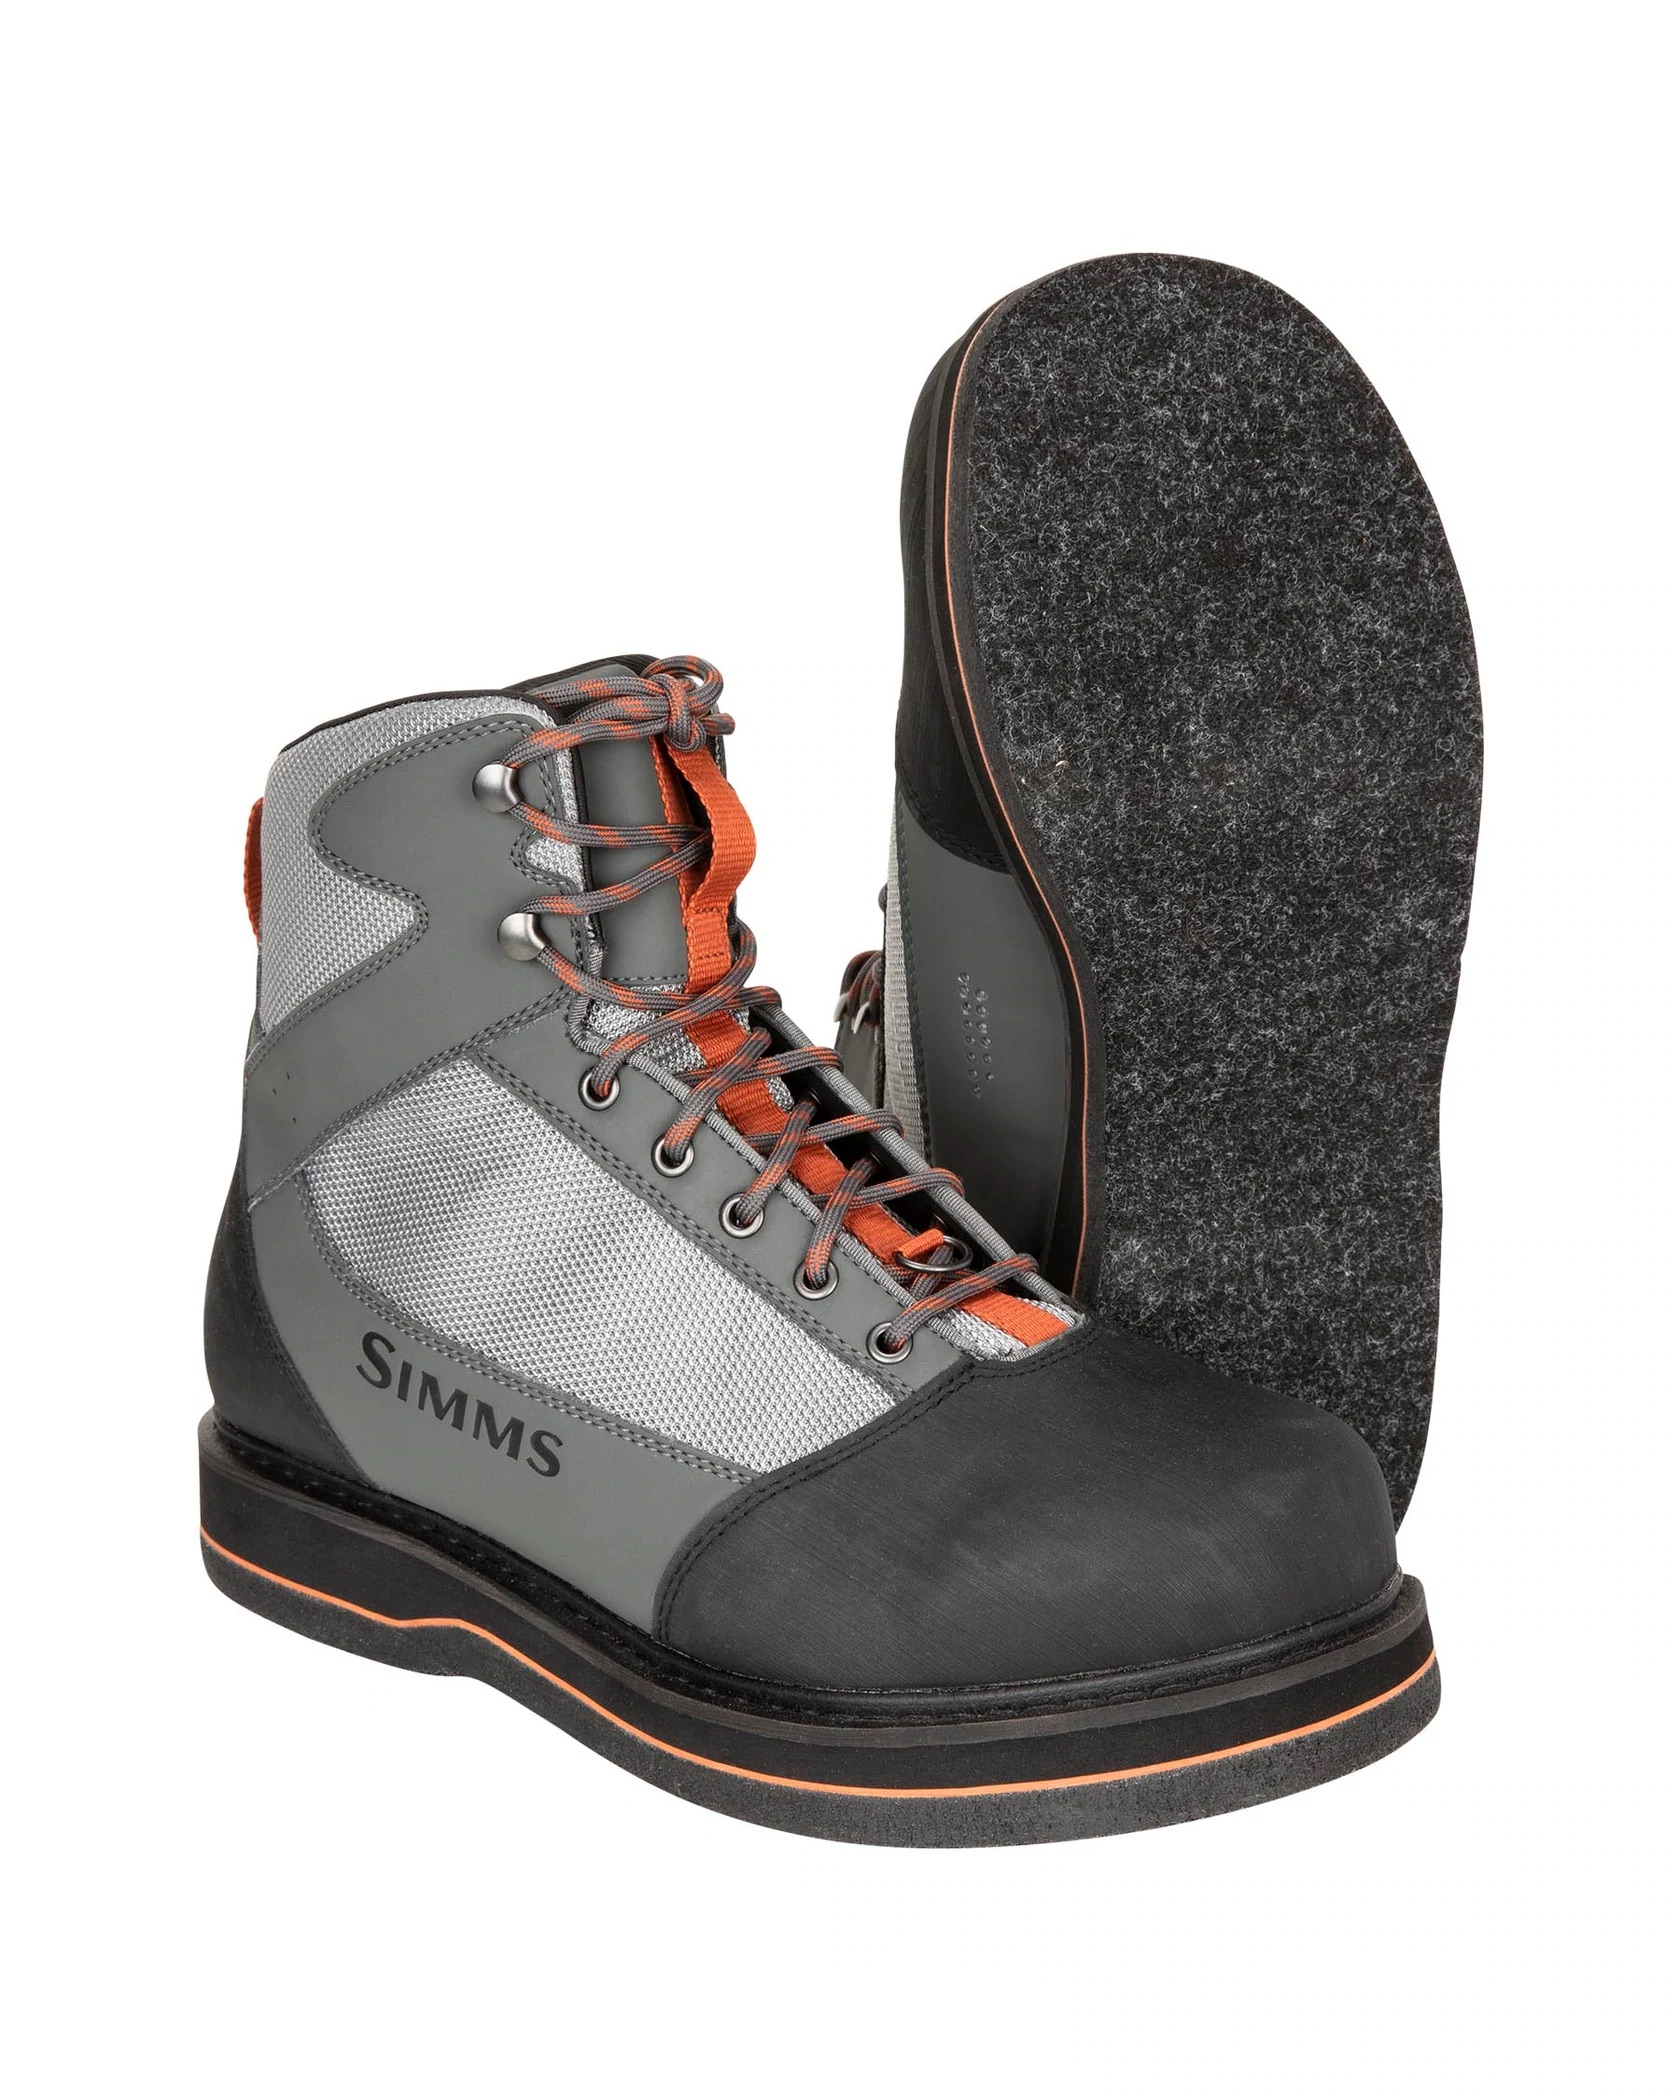 Simms Tributary Boot - Felt - Size 13